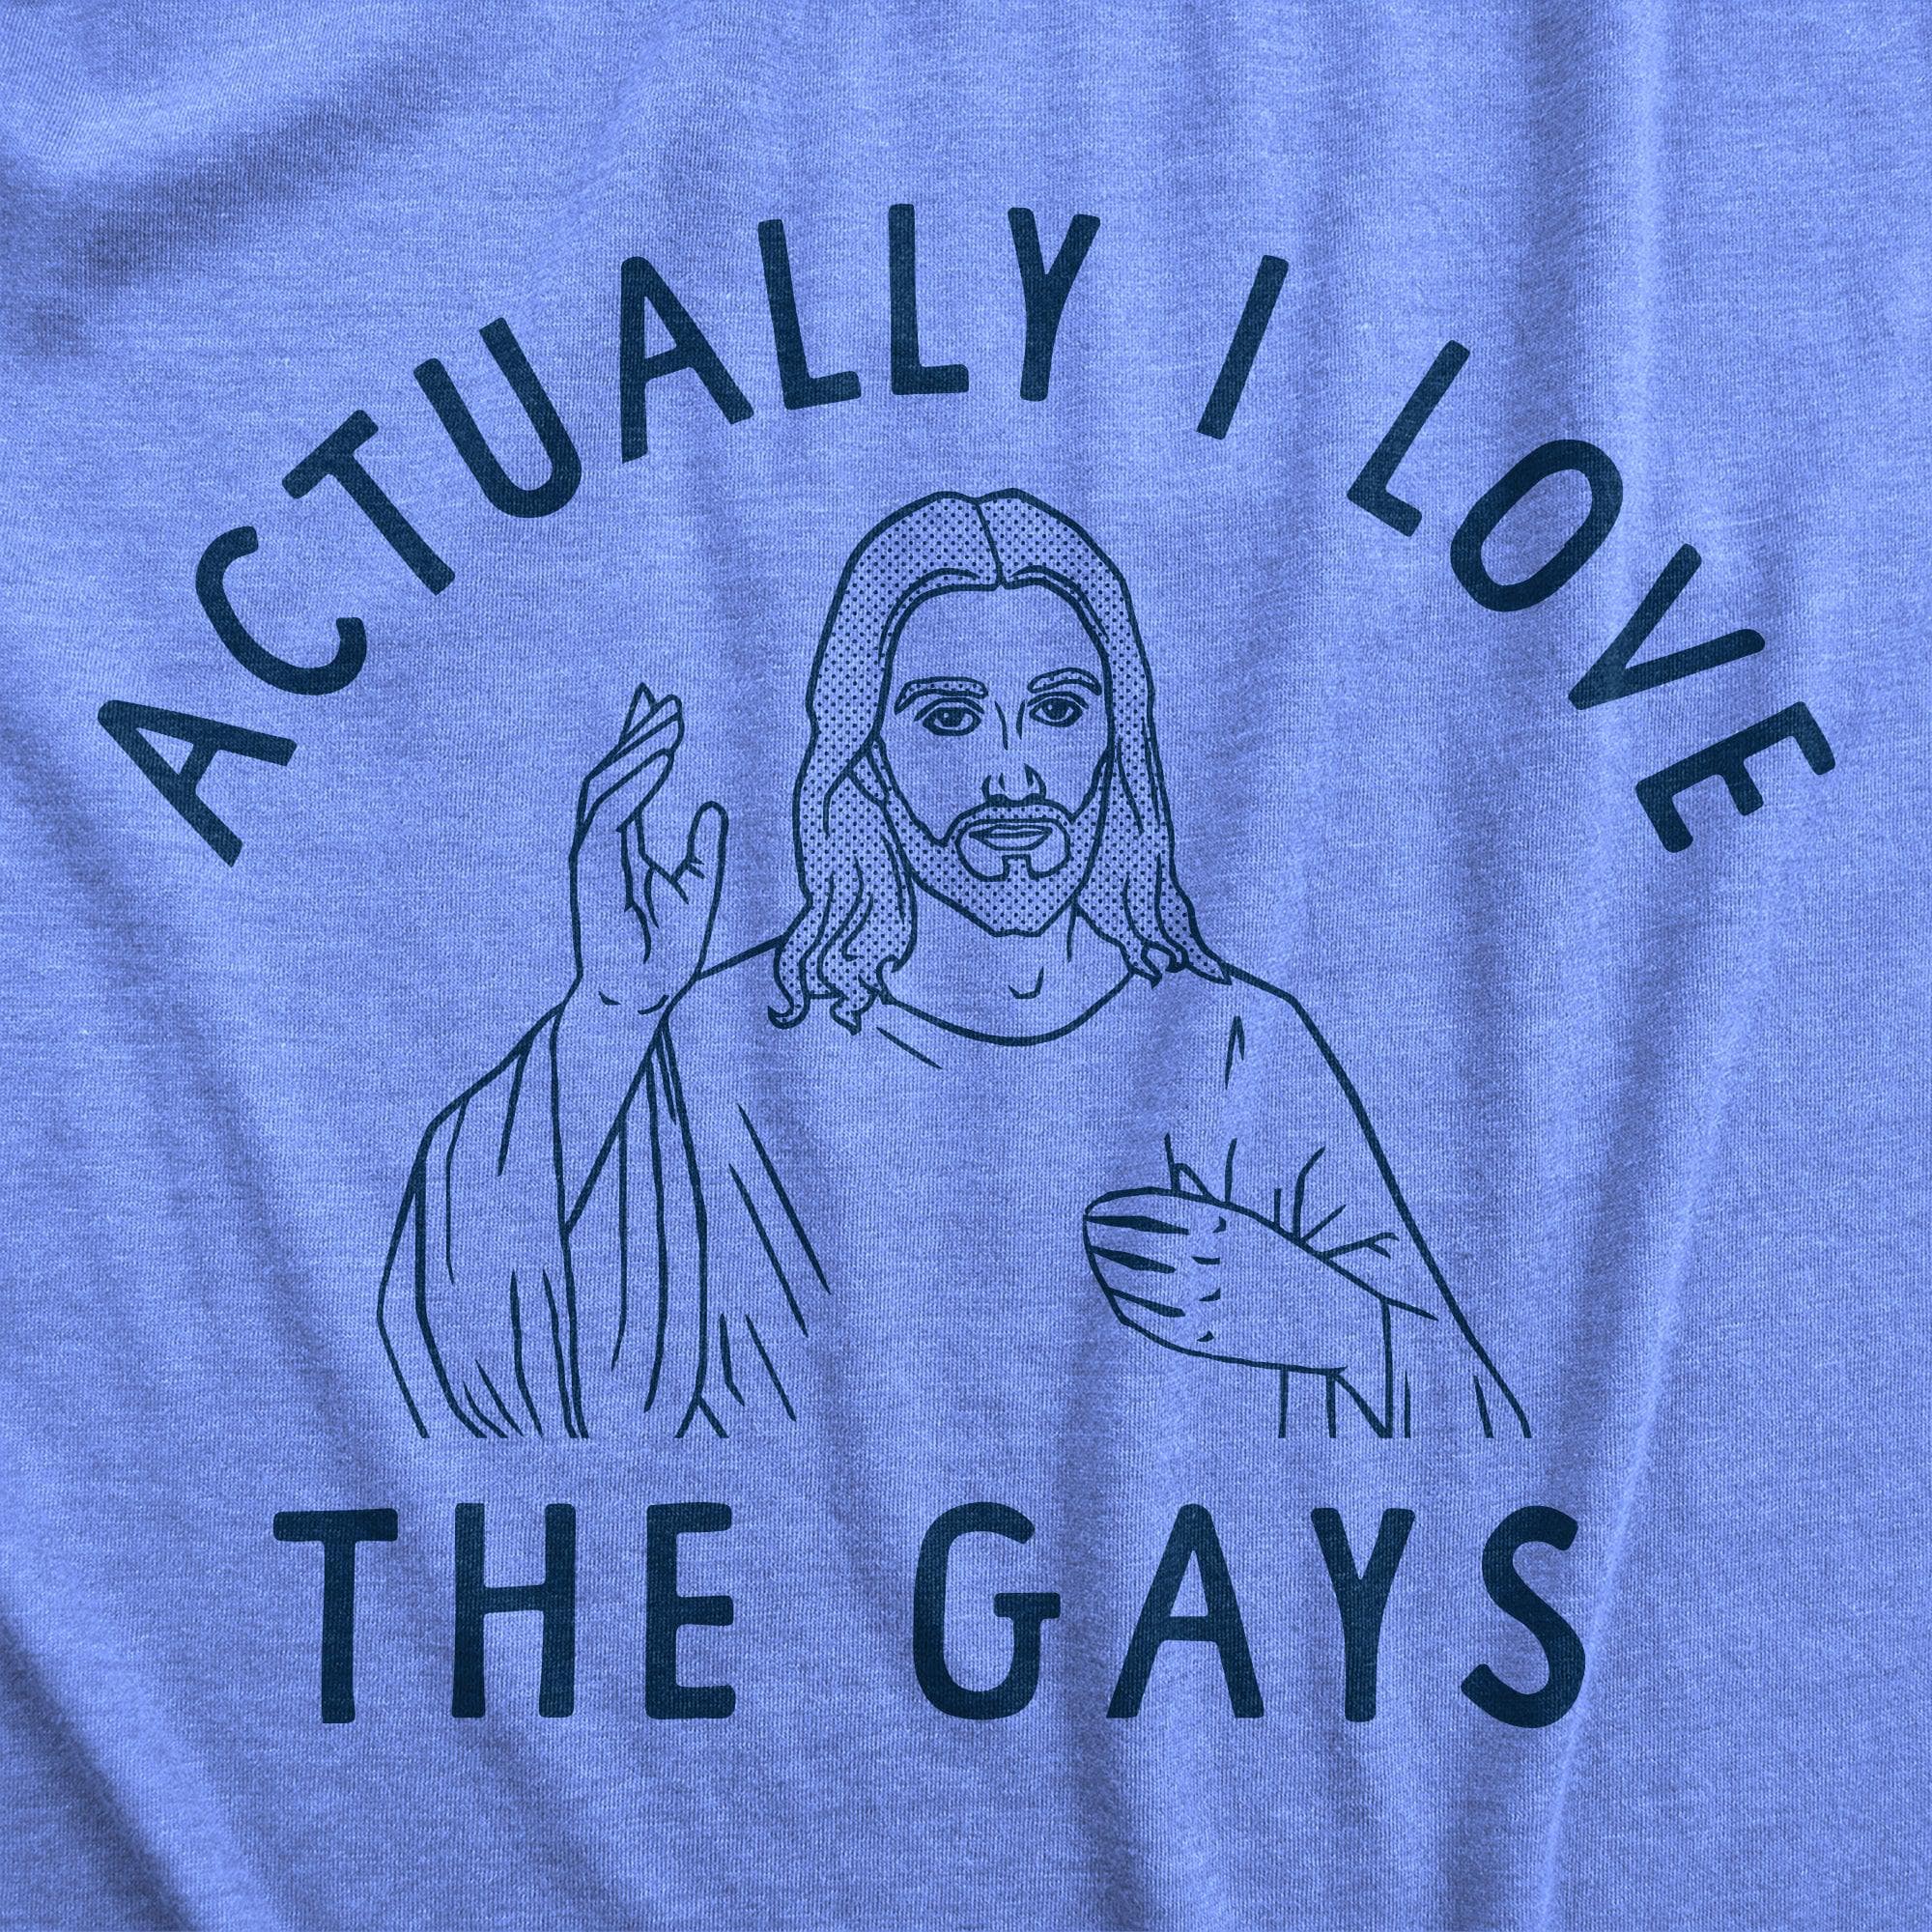 Actually I Love The Gays Men's Tshirt  -  Crazy Dog T-Shirts